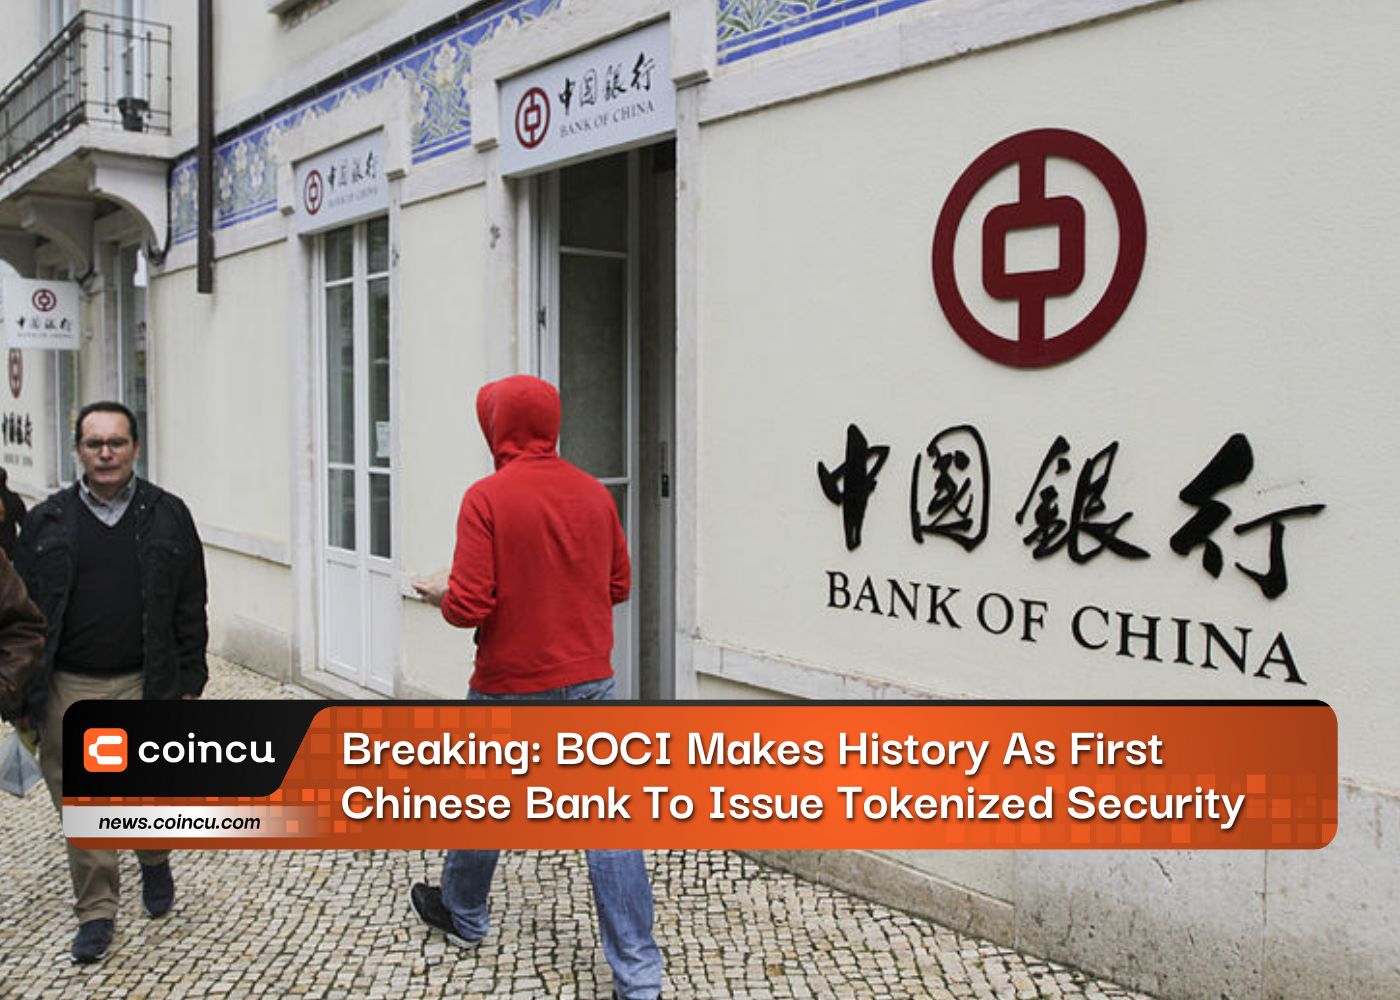 Breaking: BOCI Makes History As First Chinese Bank To Issue Tokenized Security